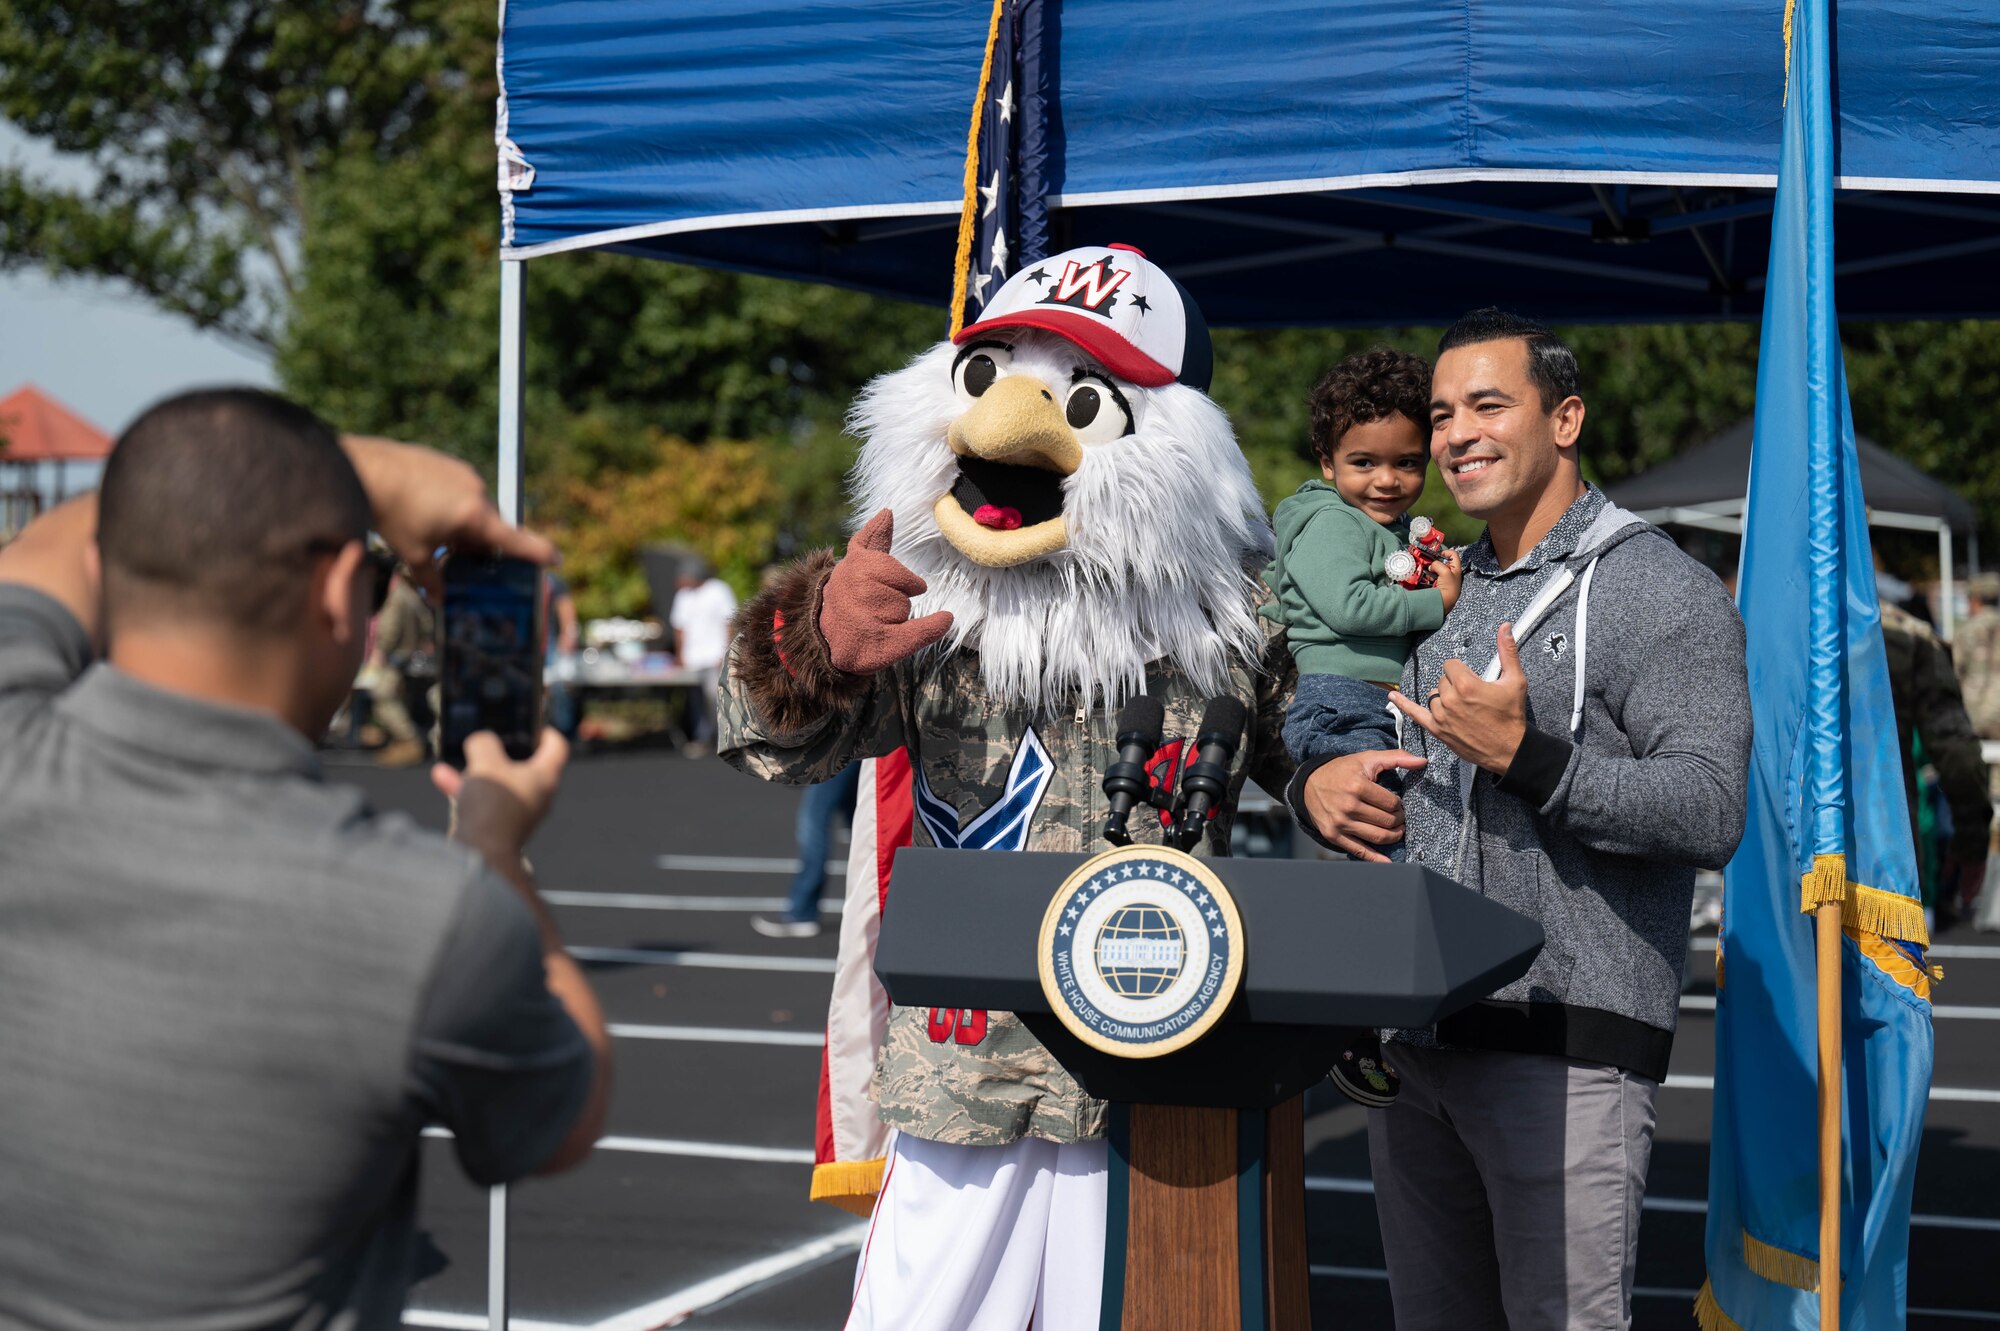 Maj. Ralph Soto and Lucas Soto pose with "Screech," the Washington Nationals' mascot, at the Sentinels Celebration, Joint Base Anacostia-Bolling, Washington, D.C., Oct. 12, 2022. Mission partners and units across the National Capital Region came together to celebrate the base reaching Full Operational Capability after the first-ever Department of Defense lead service transfer in 2020. (U.S. Air Force photo by Kristen Wong)